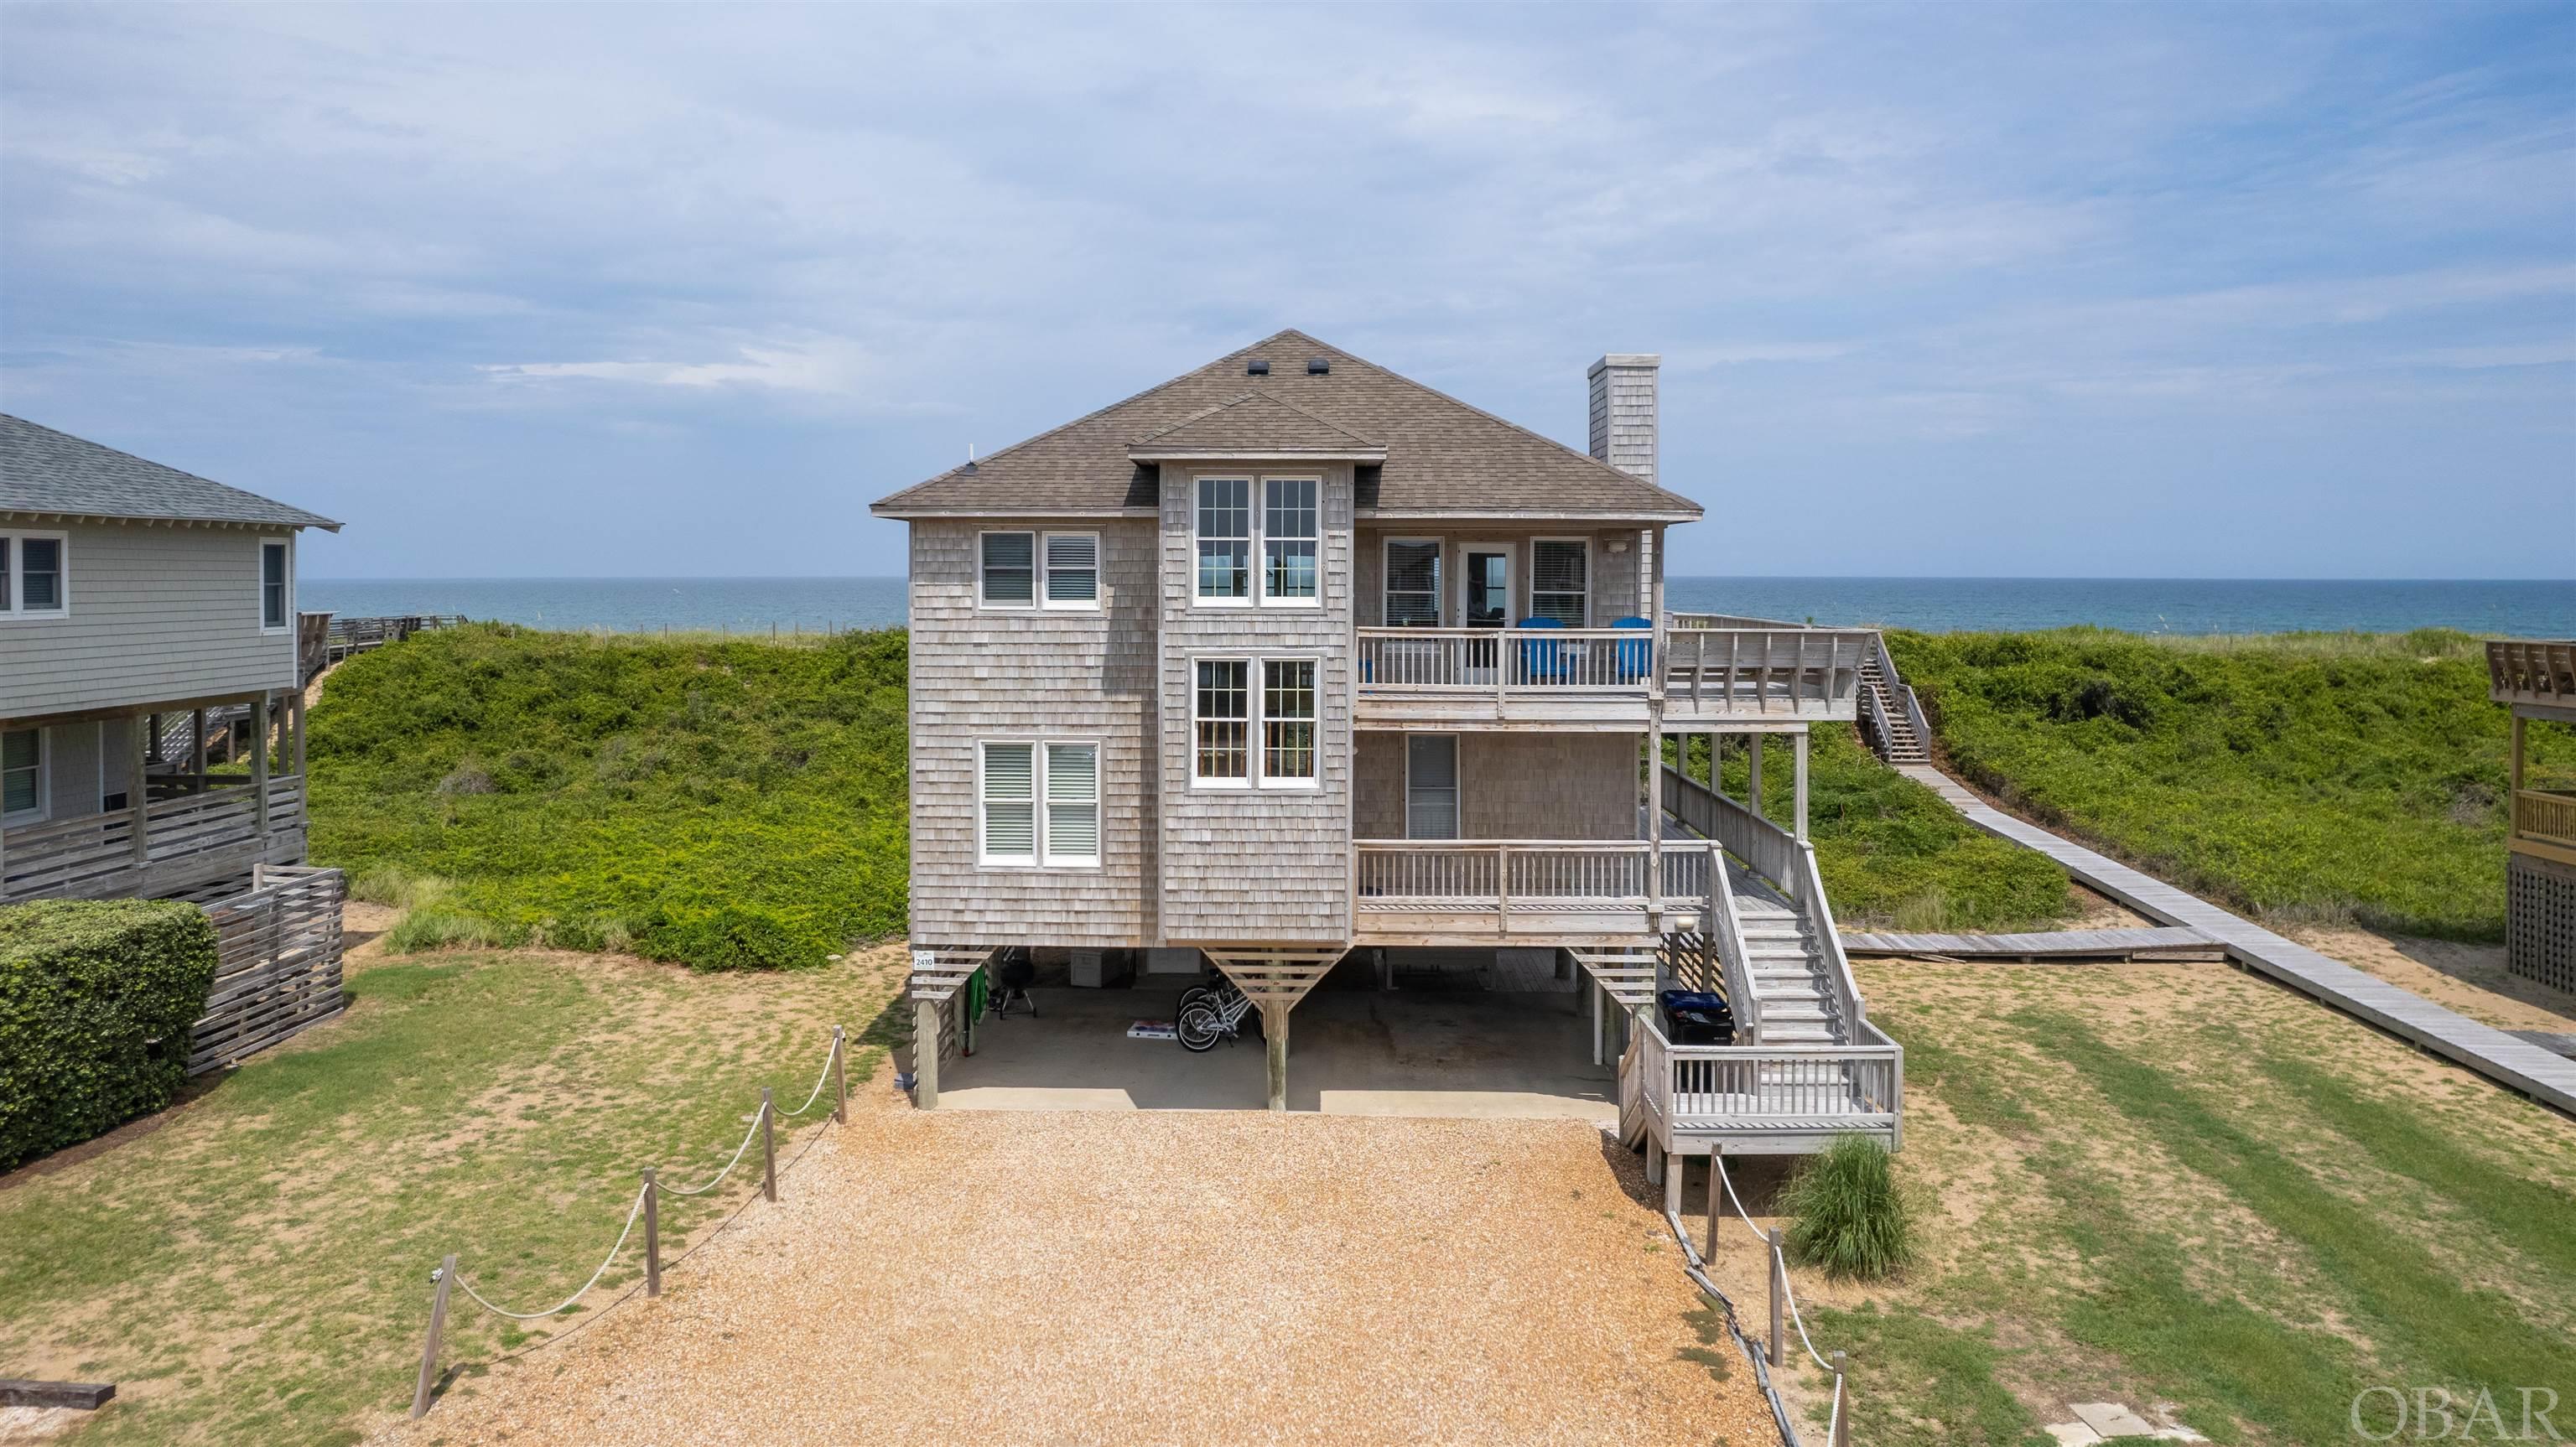 Enjoy Amazing Sunrises & Sunsets from this lovely Oceanfront Sanderling Home! This community is well known for Preserving as much of the Natural Beauty of the Outer Banks as possible. From the moment you turn off of NC12 you will feel like you have entered a Nature Preserve at The Beach.  Your Direct Beach Access and Spectacular Ocean Views complete the picture! Top floor features a Spacious Open Floor Plan with Living Room, Dining Room & Kitchen with Granite Countertops, Custom Glass Backsplash and Soft Close Cabinets and a Half Bath. Juniper Cathedral Ceilings and an Oceanfront Reading/Media Room with a Door for Privacy provide a Great Space to Kick Back & Relax.  Lower level has 4 Bedrooms including the Oceanfront Master Bedroom with access to the Shade Deck.  The ground floor features a Large Outside Shower and separate Foot Shower so you can rinse those "Toes in the Sand".  Amenities include Community Pool, Tennis Courts, Health Club and Sound Access.  Close to all of the Shopping, Restaurants and Entertainment that the Village of Duck has to offer.  New HVAC upstairs 2022, downstairs 2021. If you are looking for a Little Slice of what the beach "Used To Be Like" make "Come Sail Away" your new Port O' Call.  2023 pre bookings in assoc docs.